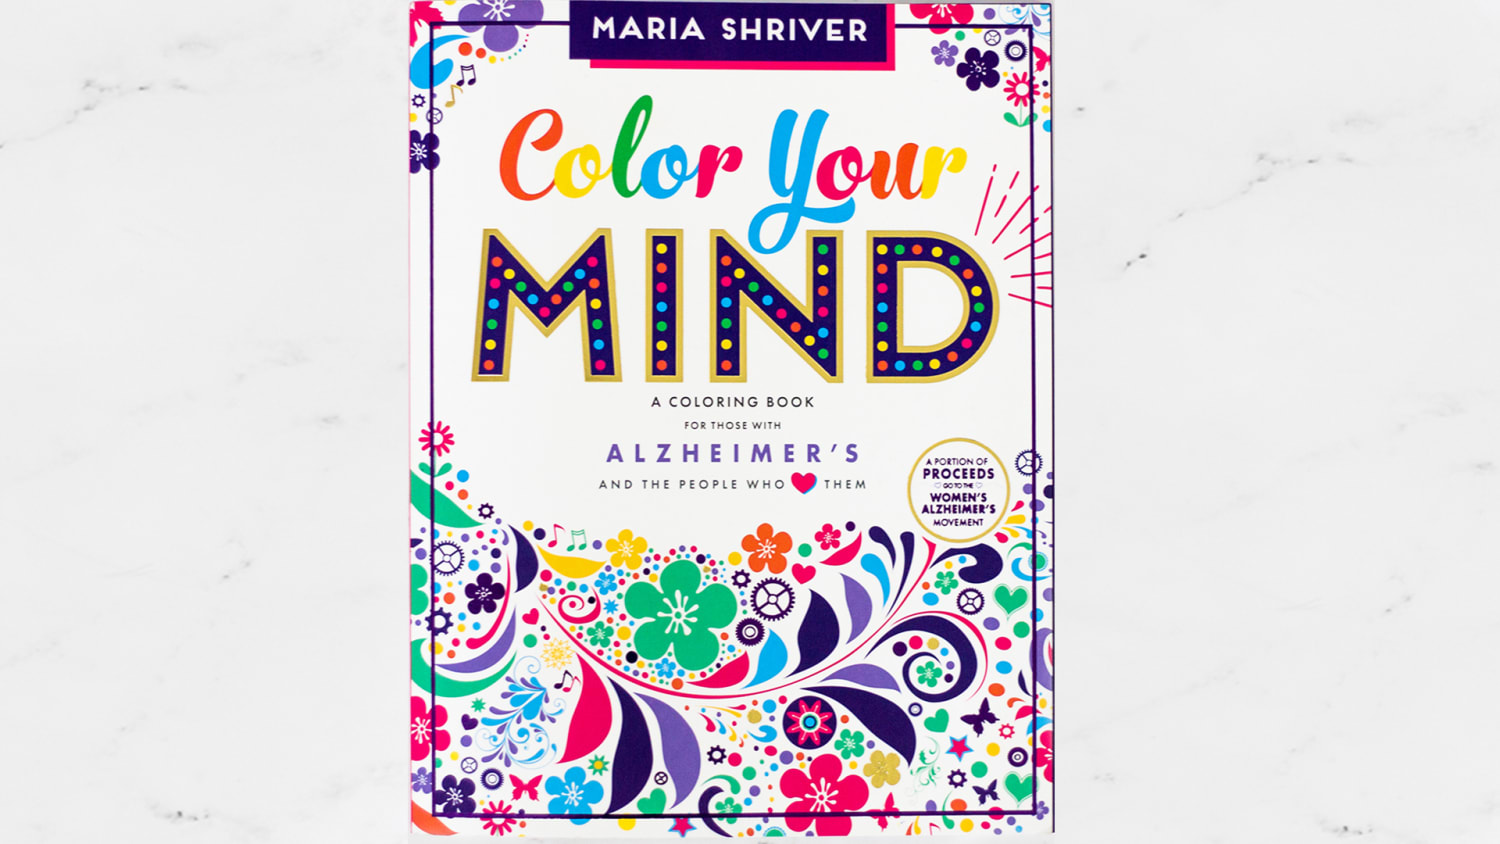 Alzheimer's disease coloring book created by Maria Shriver - TODAY.com